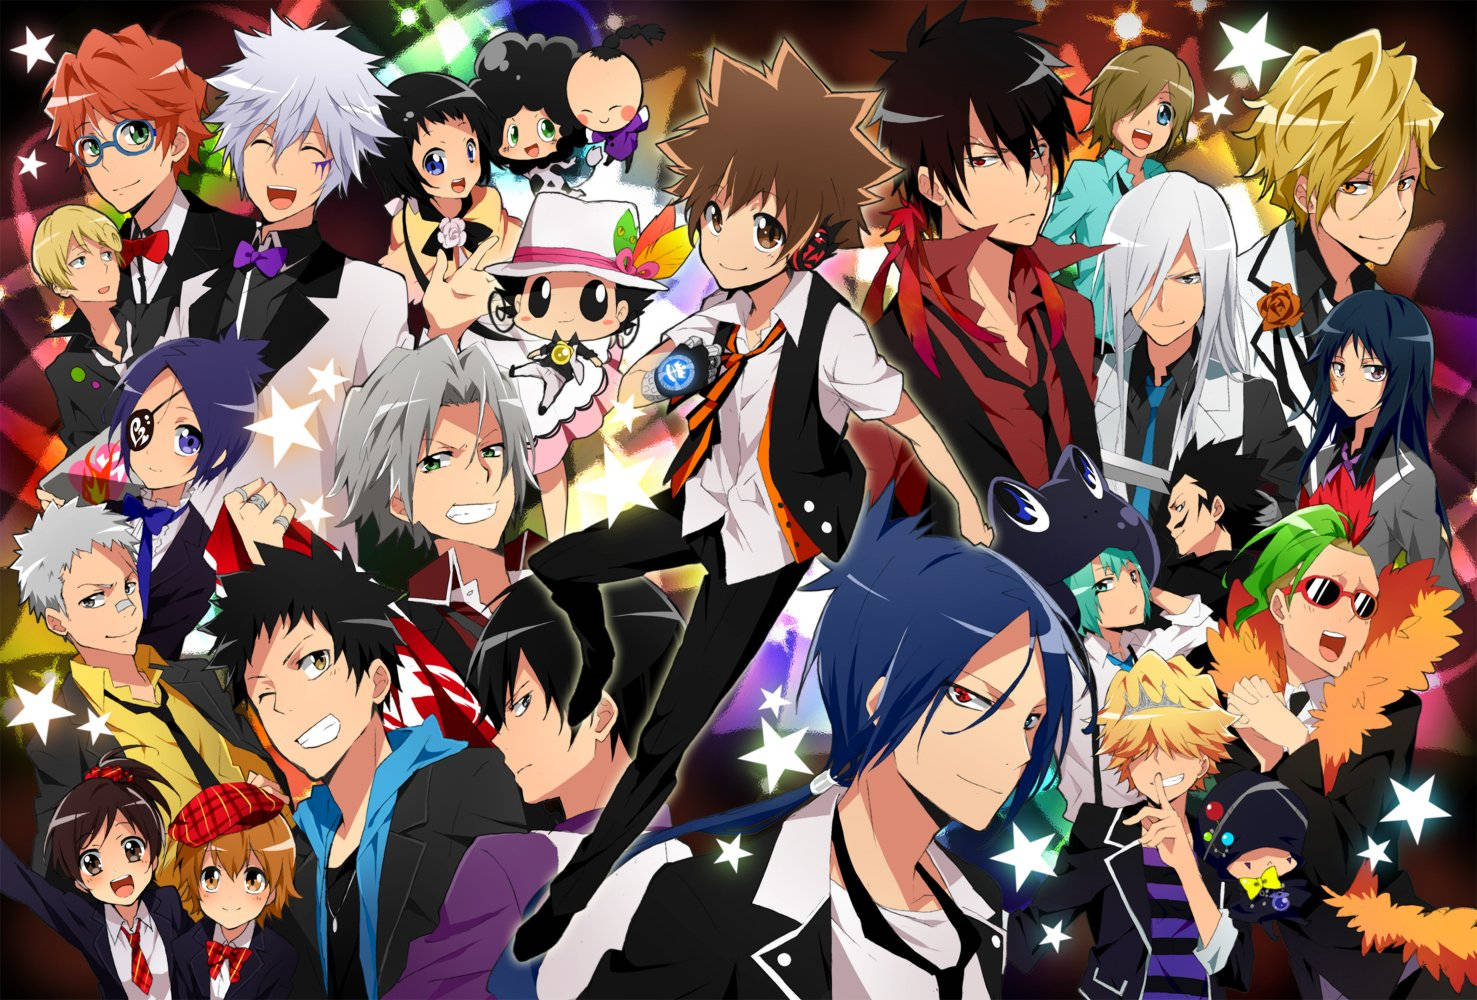 Free All Anime Wallpaper Downloads, [100+] All Anime Wallpapers for FREE |  